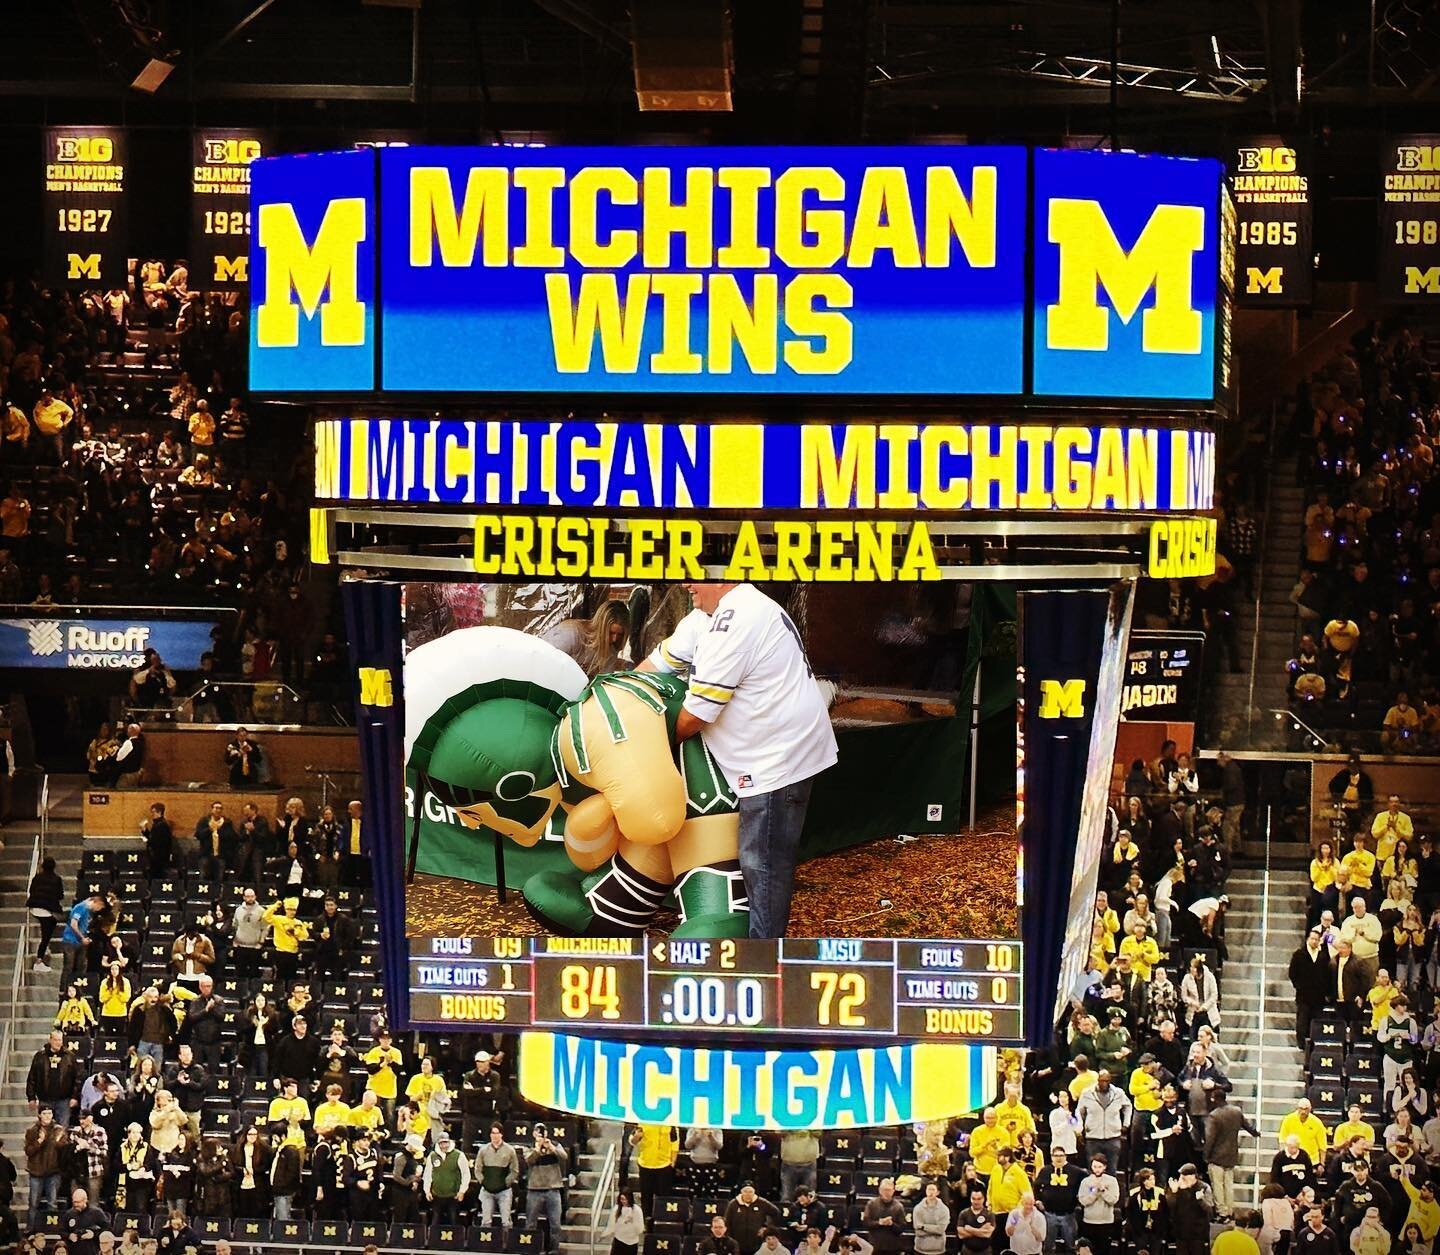 A somber unity to kick things off, but the evening ends with a very enjoyable double digit win over the Spartans in the Crisler Center.  Wolverines hold serve in the three major sports over MSU.  #goblue #spartybeat #justlikefootball #wintherest